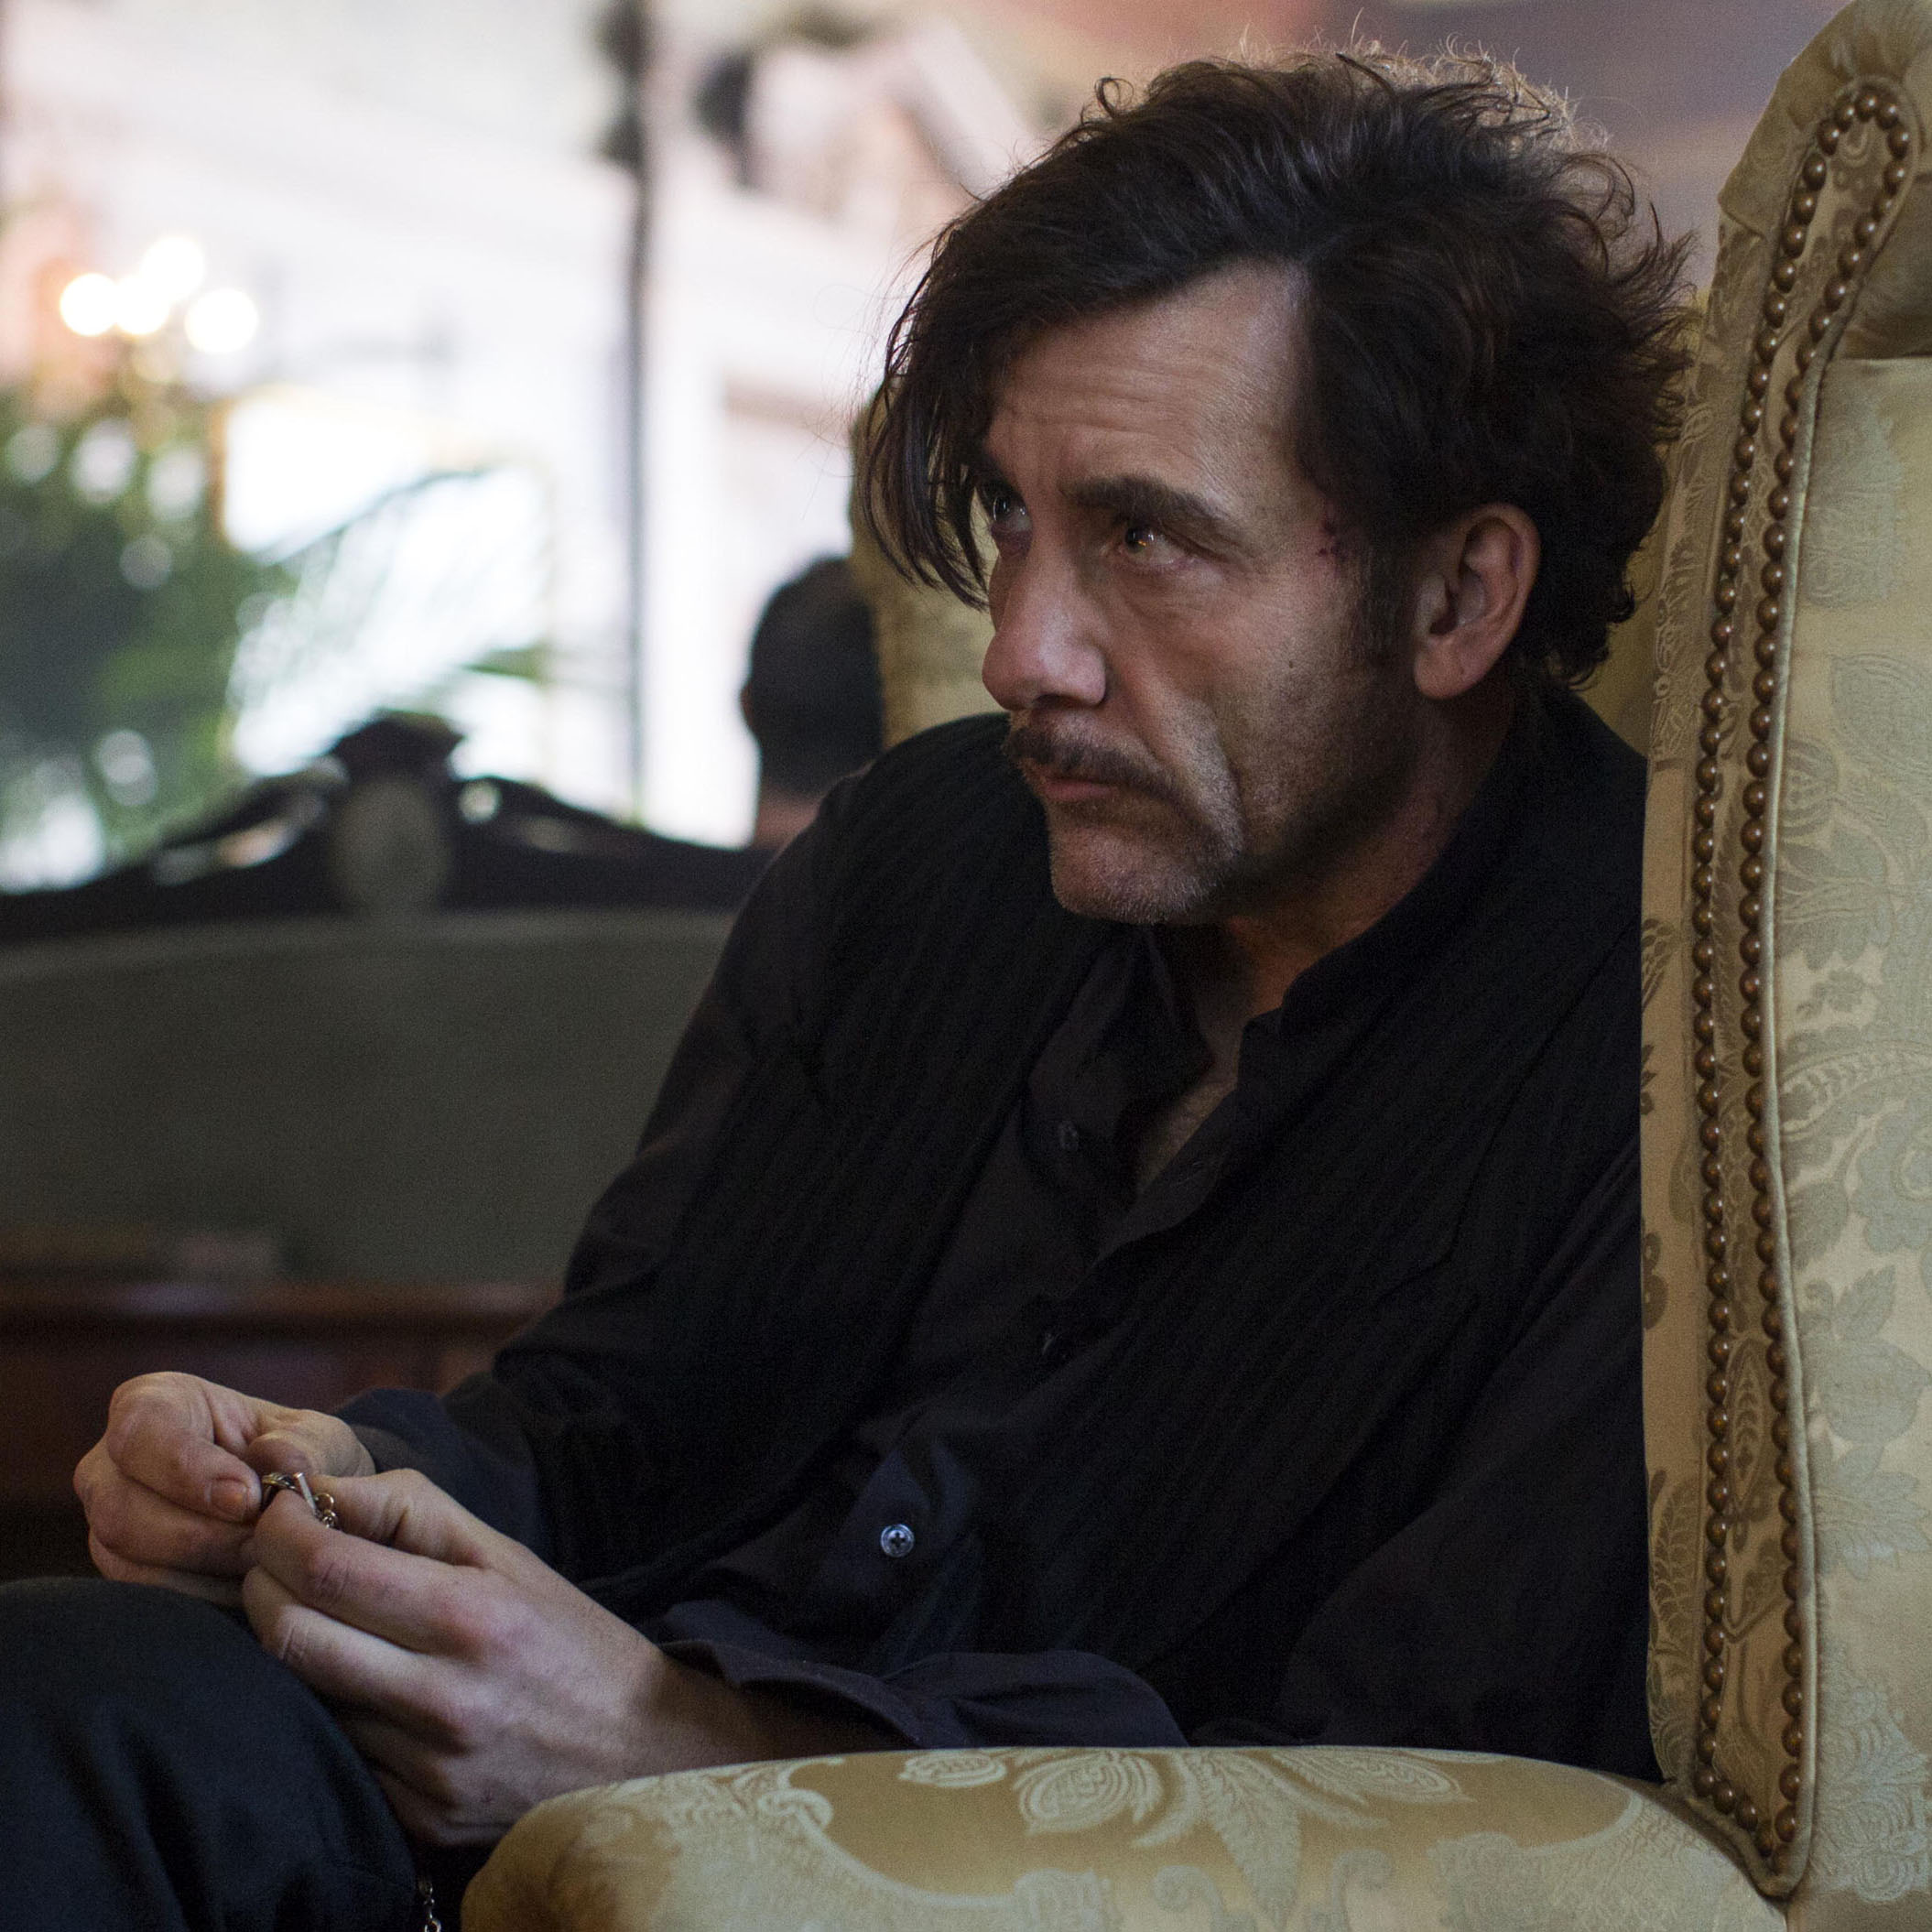 the-knick-clive-owen